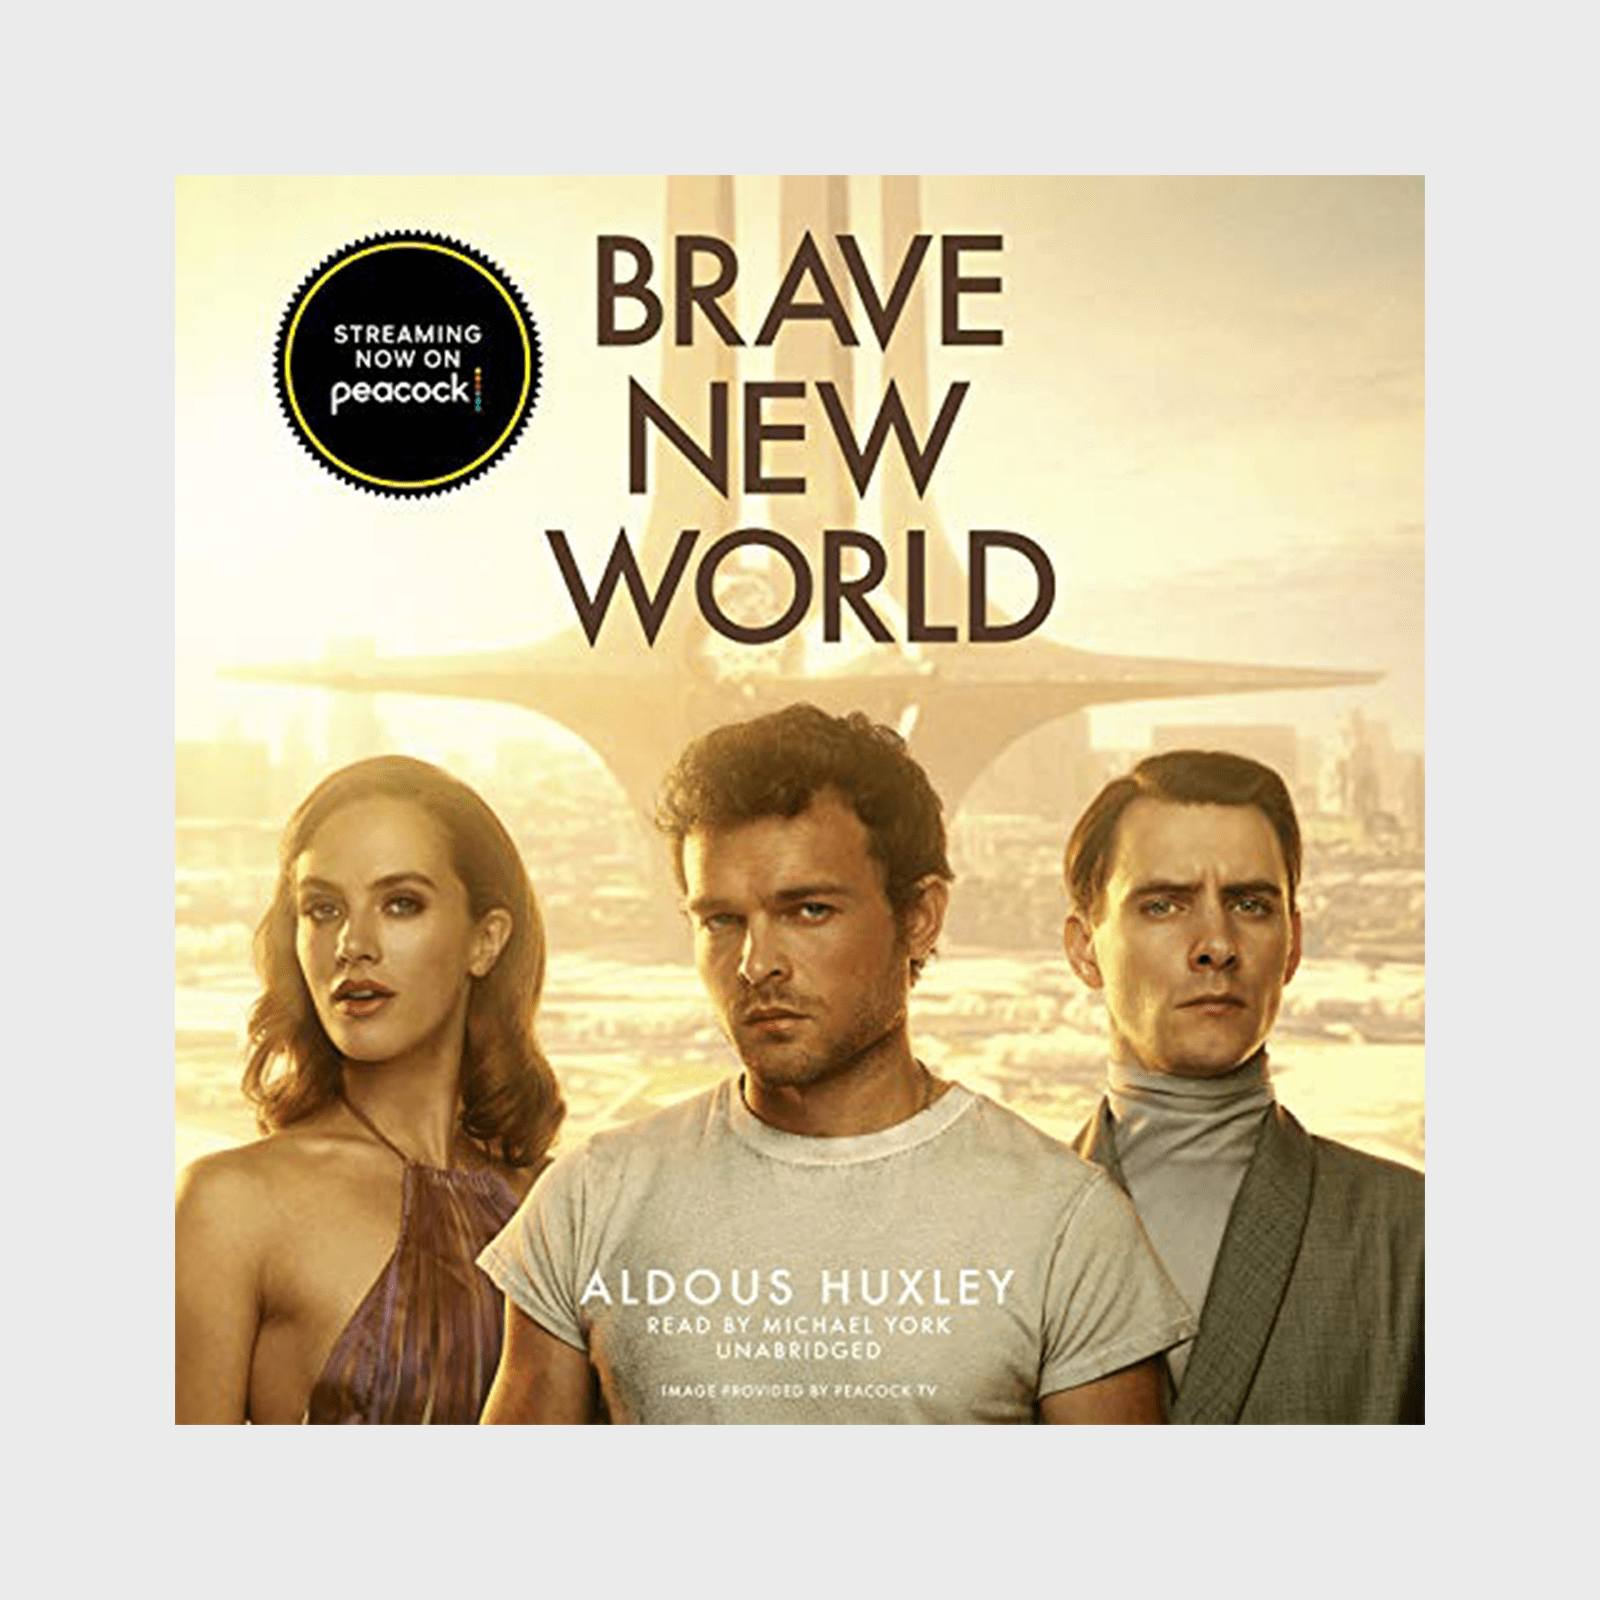 <h3><strong><em>Brave New World </em>by Aldous Huxley</strong></h3> <p>Sex, drugs, and a predetermined caste system rule in this disturbing yet relevant novel written in 1932. It's set in the year 2450, when humans are grown in bottles and then conditioned to belong to one of the World State's five castes. Mass media suppresses the possibility of any original thought. Art and religion no longer exist, and consumerism is king. If that sends chills up your spine, you're not alone. Not only is <a href="https://www.amazon.com/Brave-New-World-Aldous-Huxley-audiobook/dp/B0012QED5Y/" rel="noopener noreferrer"><em>Brave New World </em></a>one of the most famously <a href="https://www.rd.com/list/banned-books/" rel="noopener noreferrer">banned books</a>, but it's also one of the best science-fiction novels ever written, read here by acclaimed British actor Michael York.</p> <p class="listicle-page__cta-button-shop"><a class="shop-btn" href="https://www.amazon.com/Brave-New-World-Aldous-Huxley-audiobook/dp/B0012QED5Y/">Shop Now</a></p>